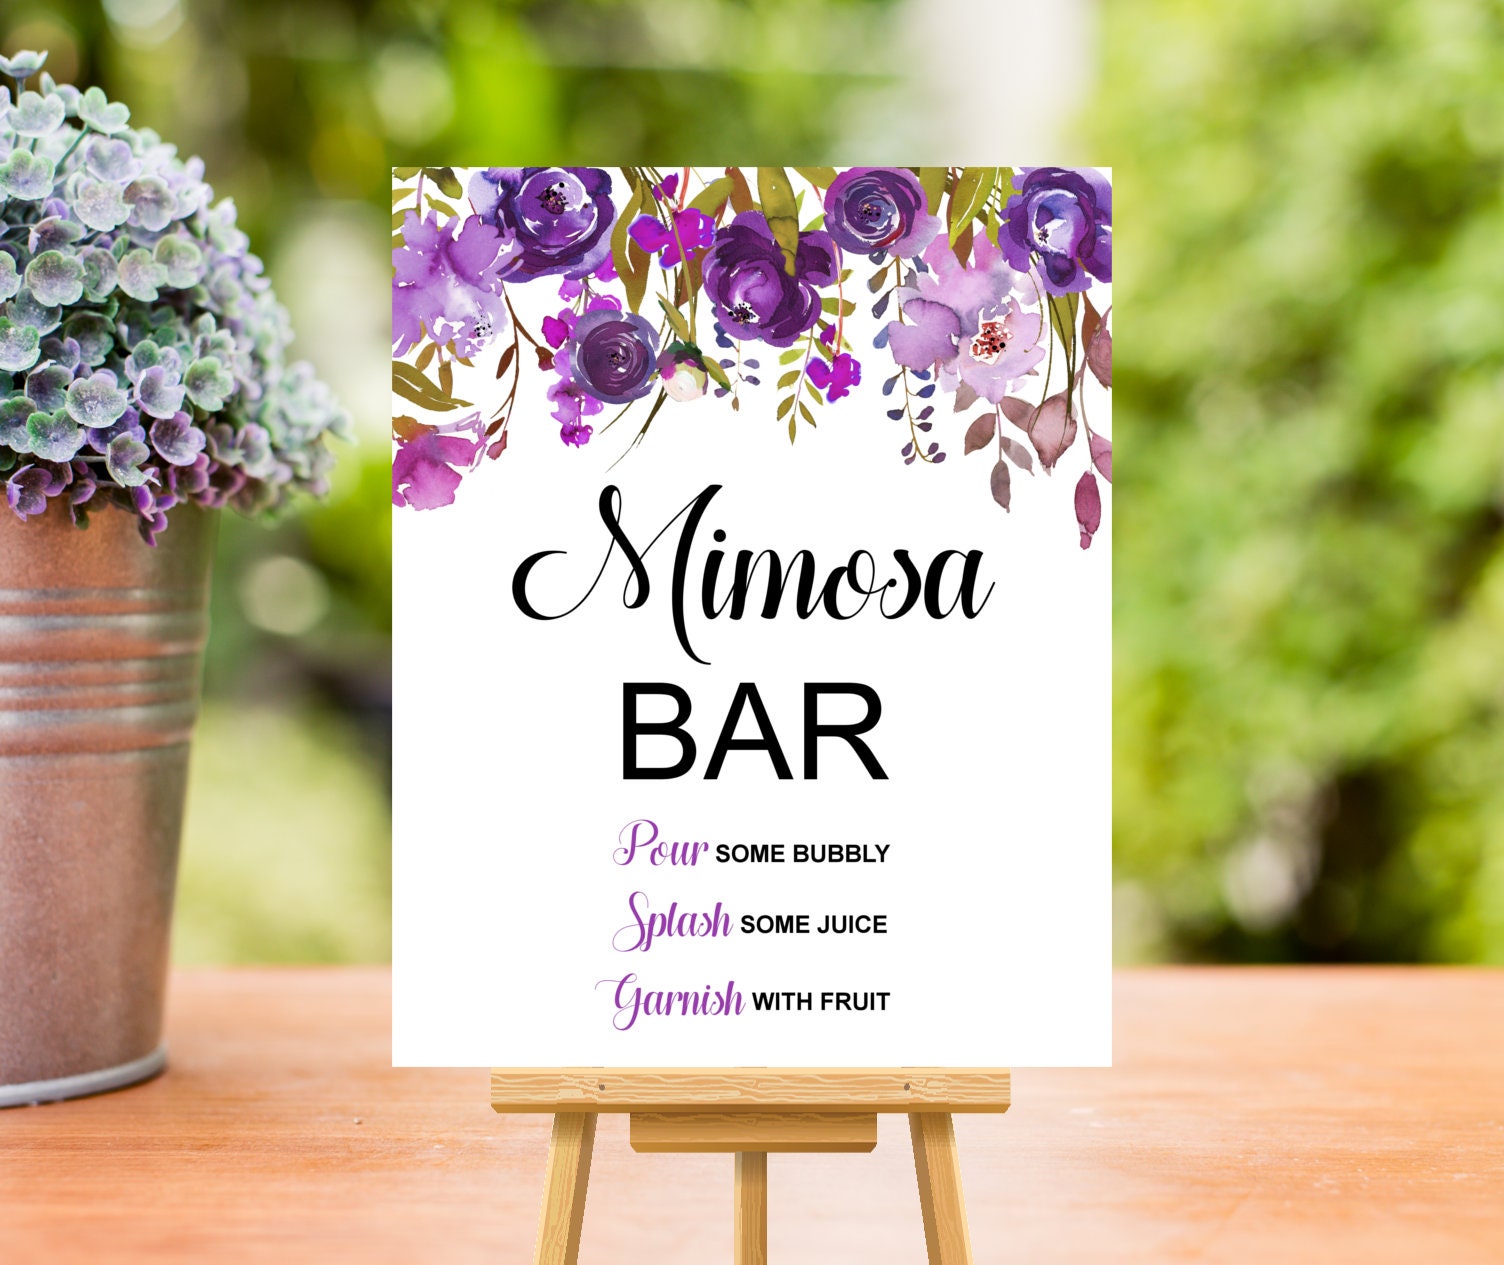 Mimosa Bar Decorations Kit, Mimosa Bar Sign Banner Tags Supplies by Hombae,  Bubbly Bar for Birthday Party, Bridal Shower, Baby Shower, Graduations and